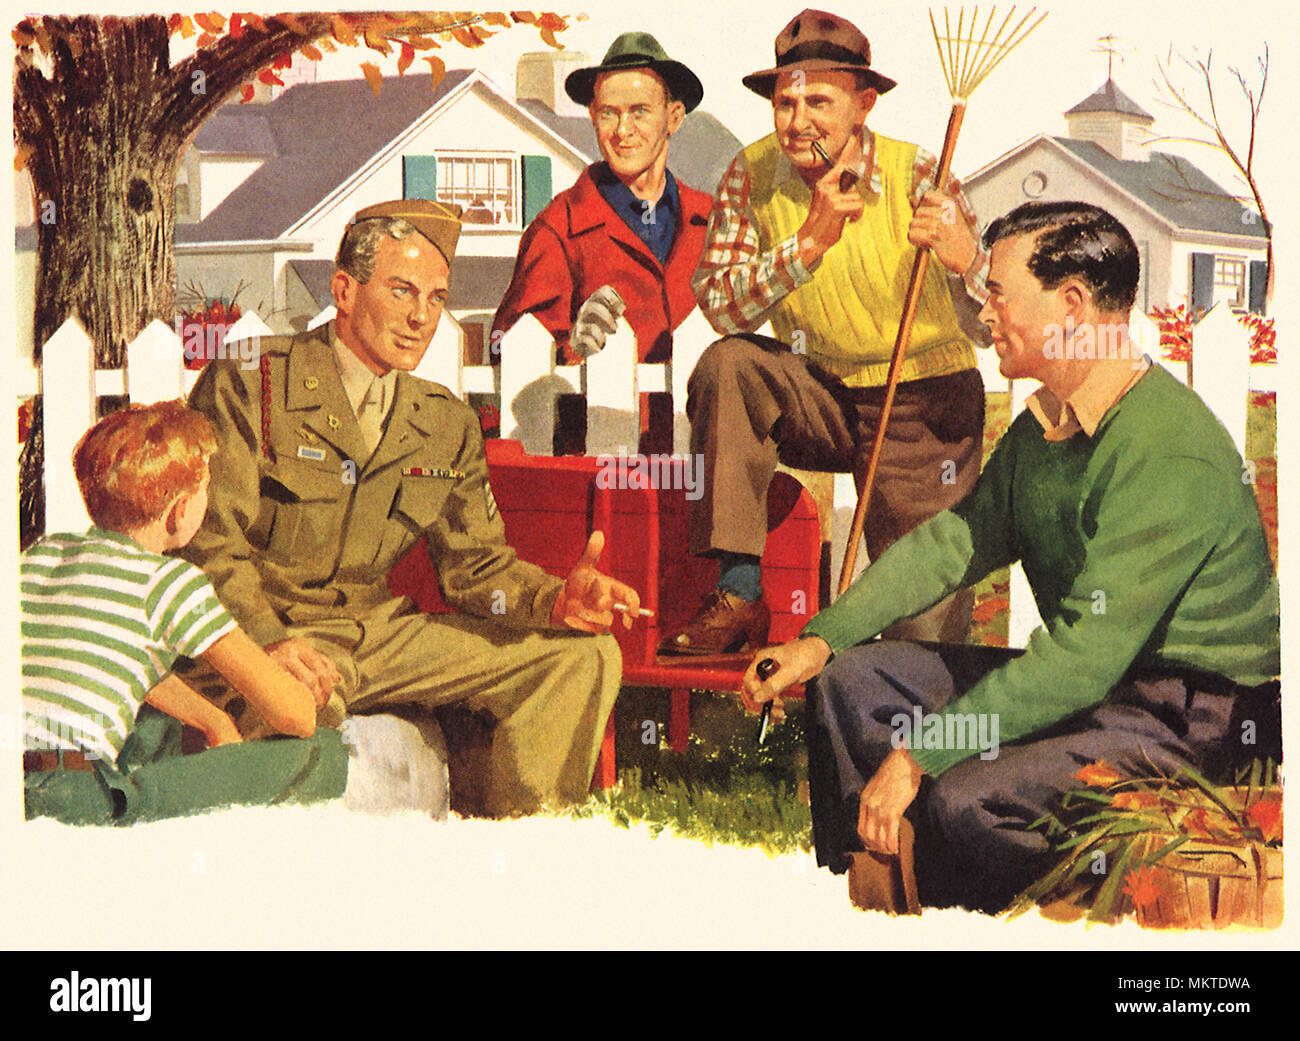 Young G.I. in Uniform talks with Neighbors Stock Photo